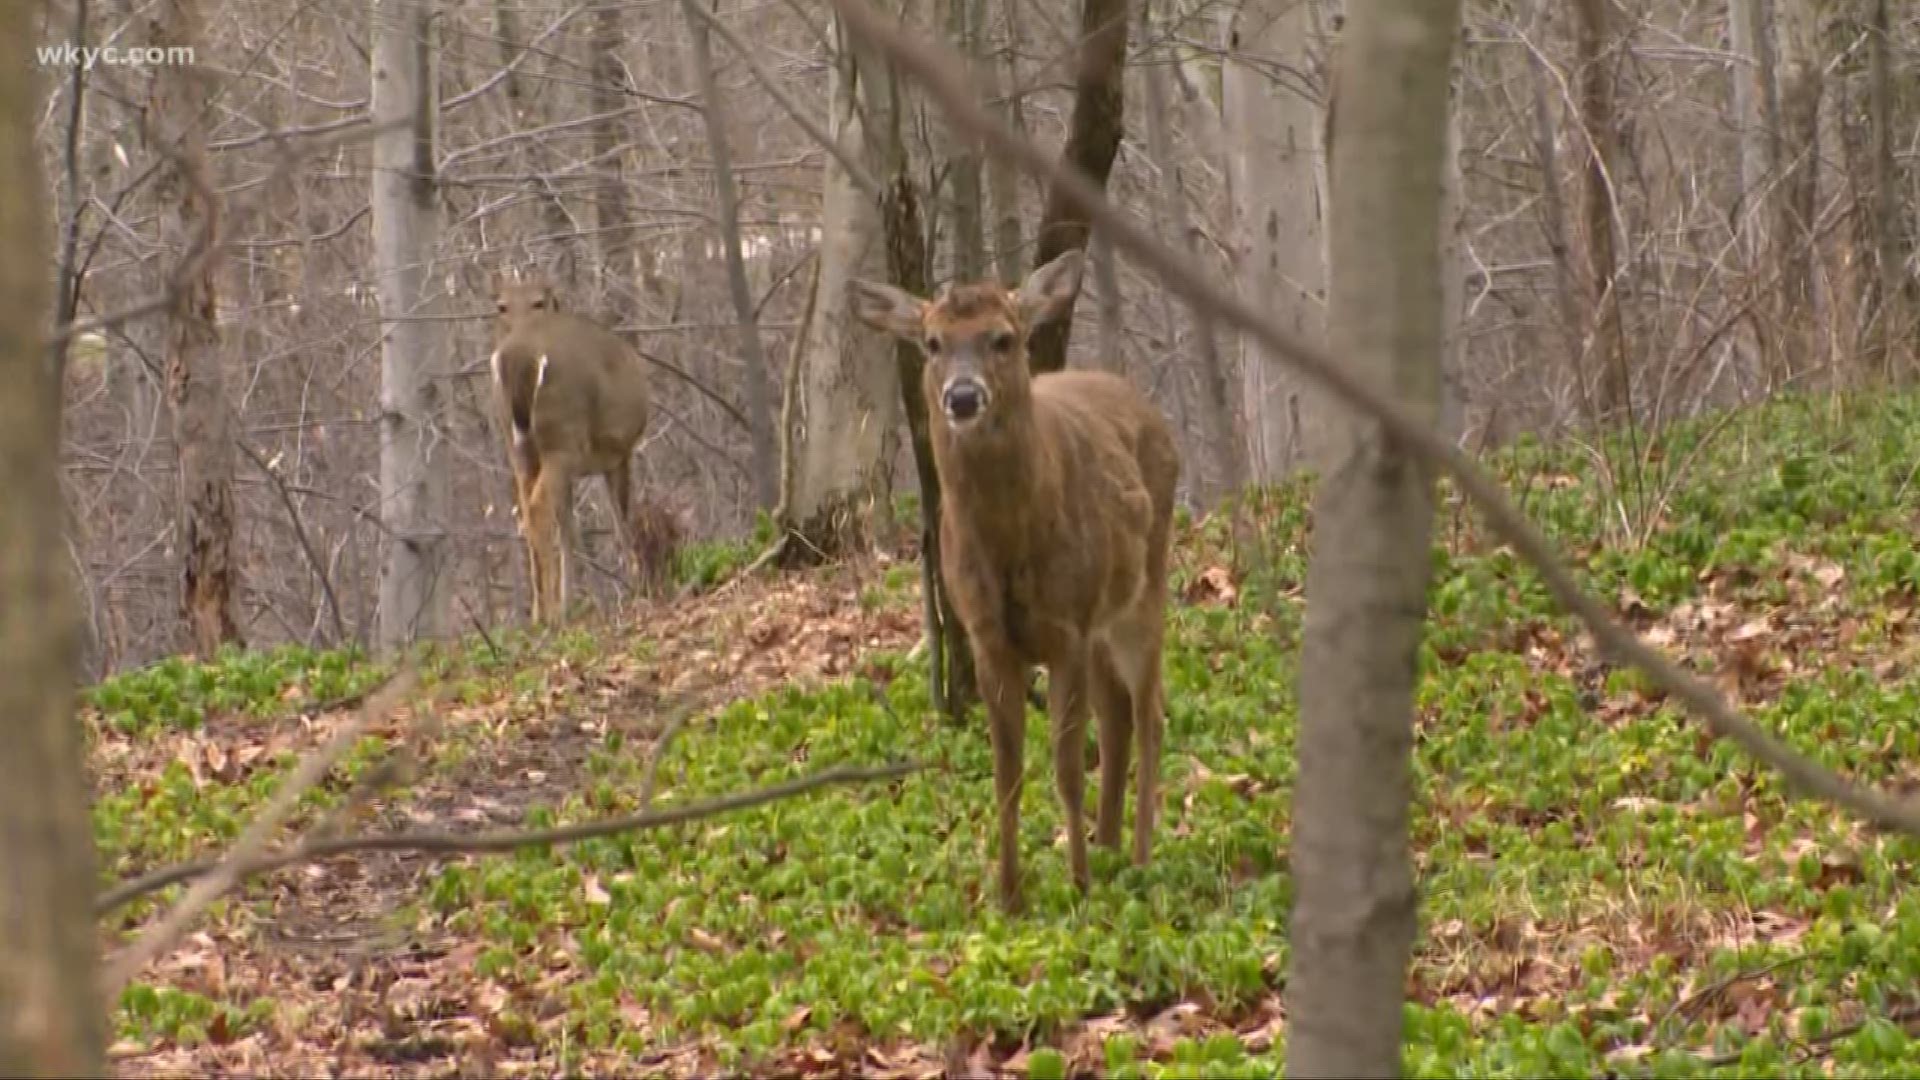 For the next two to four weeks, be on the lookout for deer. Dorsena Drakeford shares a few tips to keep the damage to a minimum during rutting season.